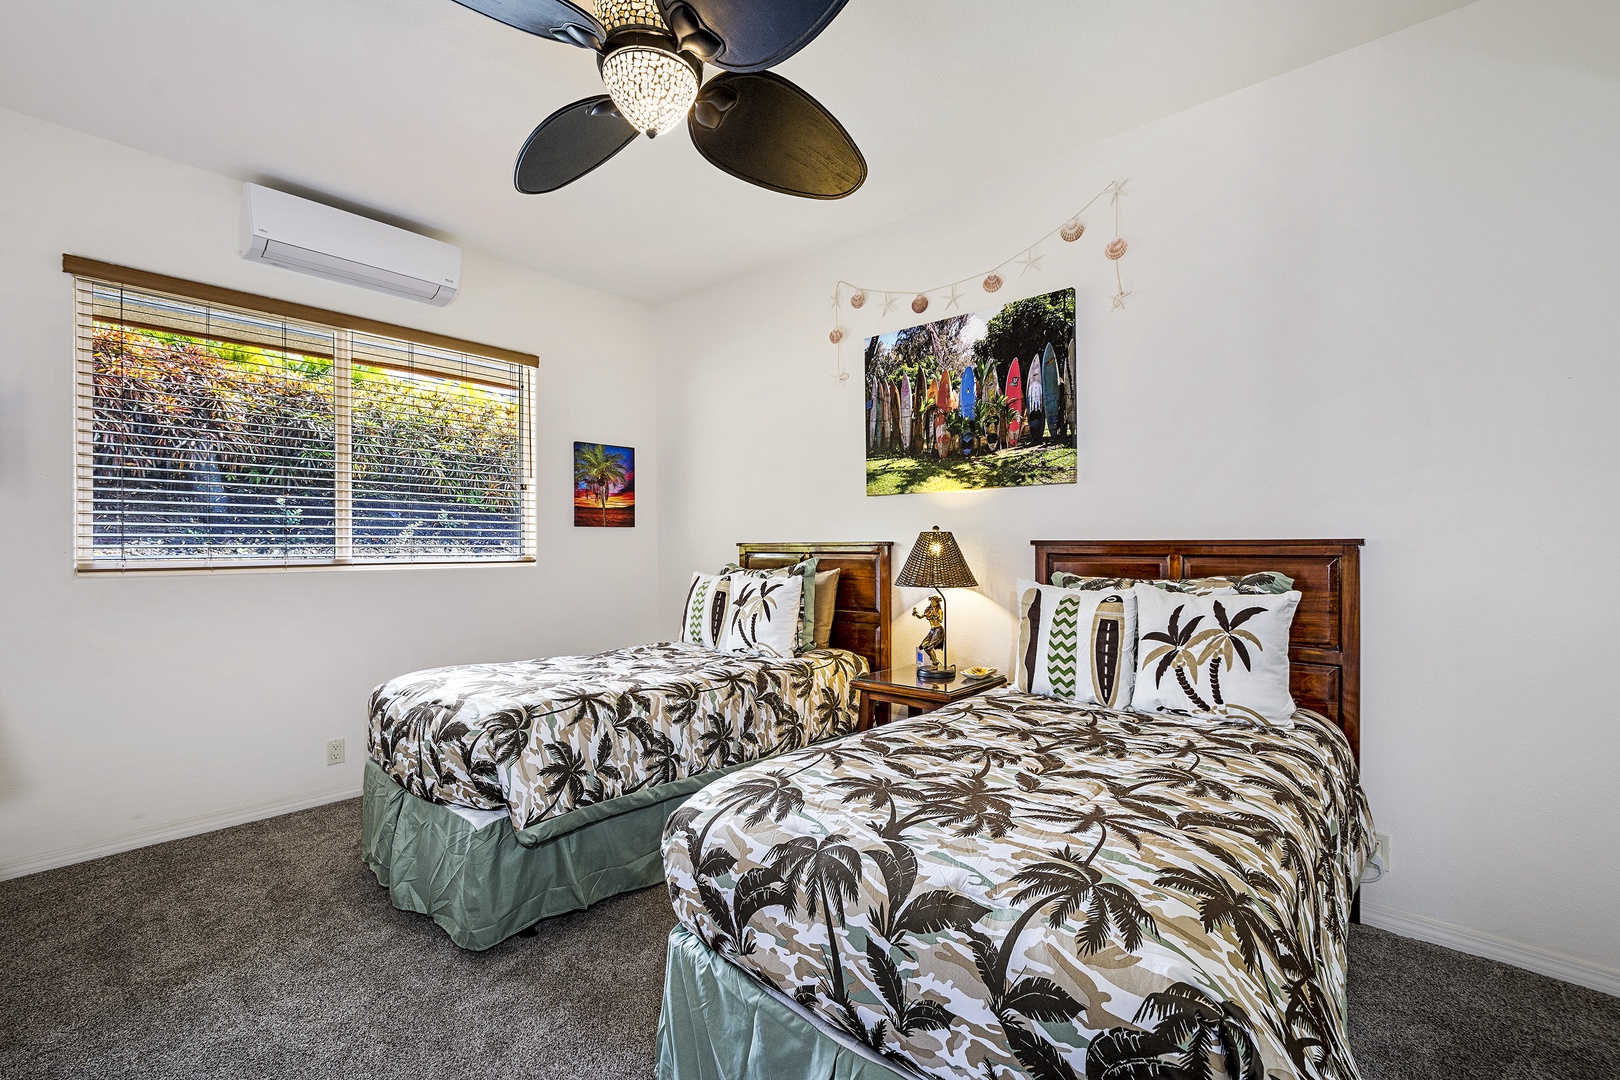 Kailua Kona Vacation Rentals, Maile Hale - Guest bedroom with 2 Twin beds